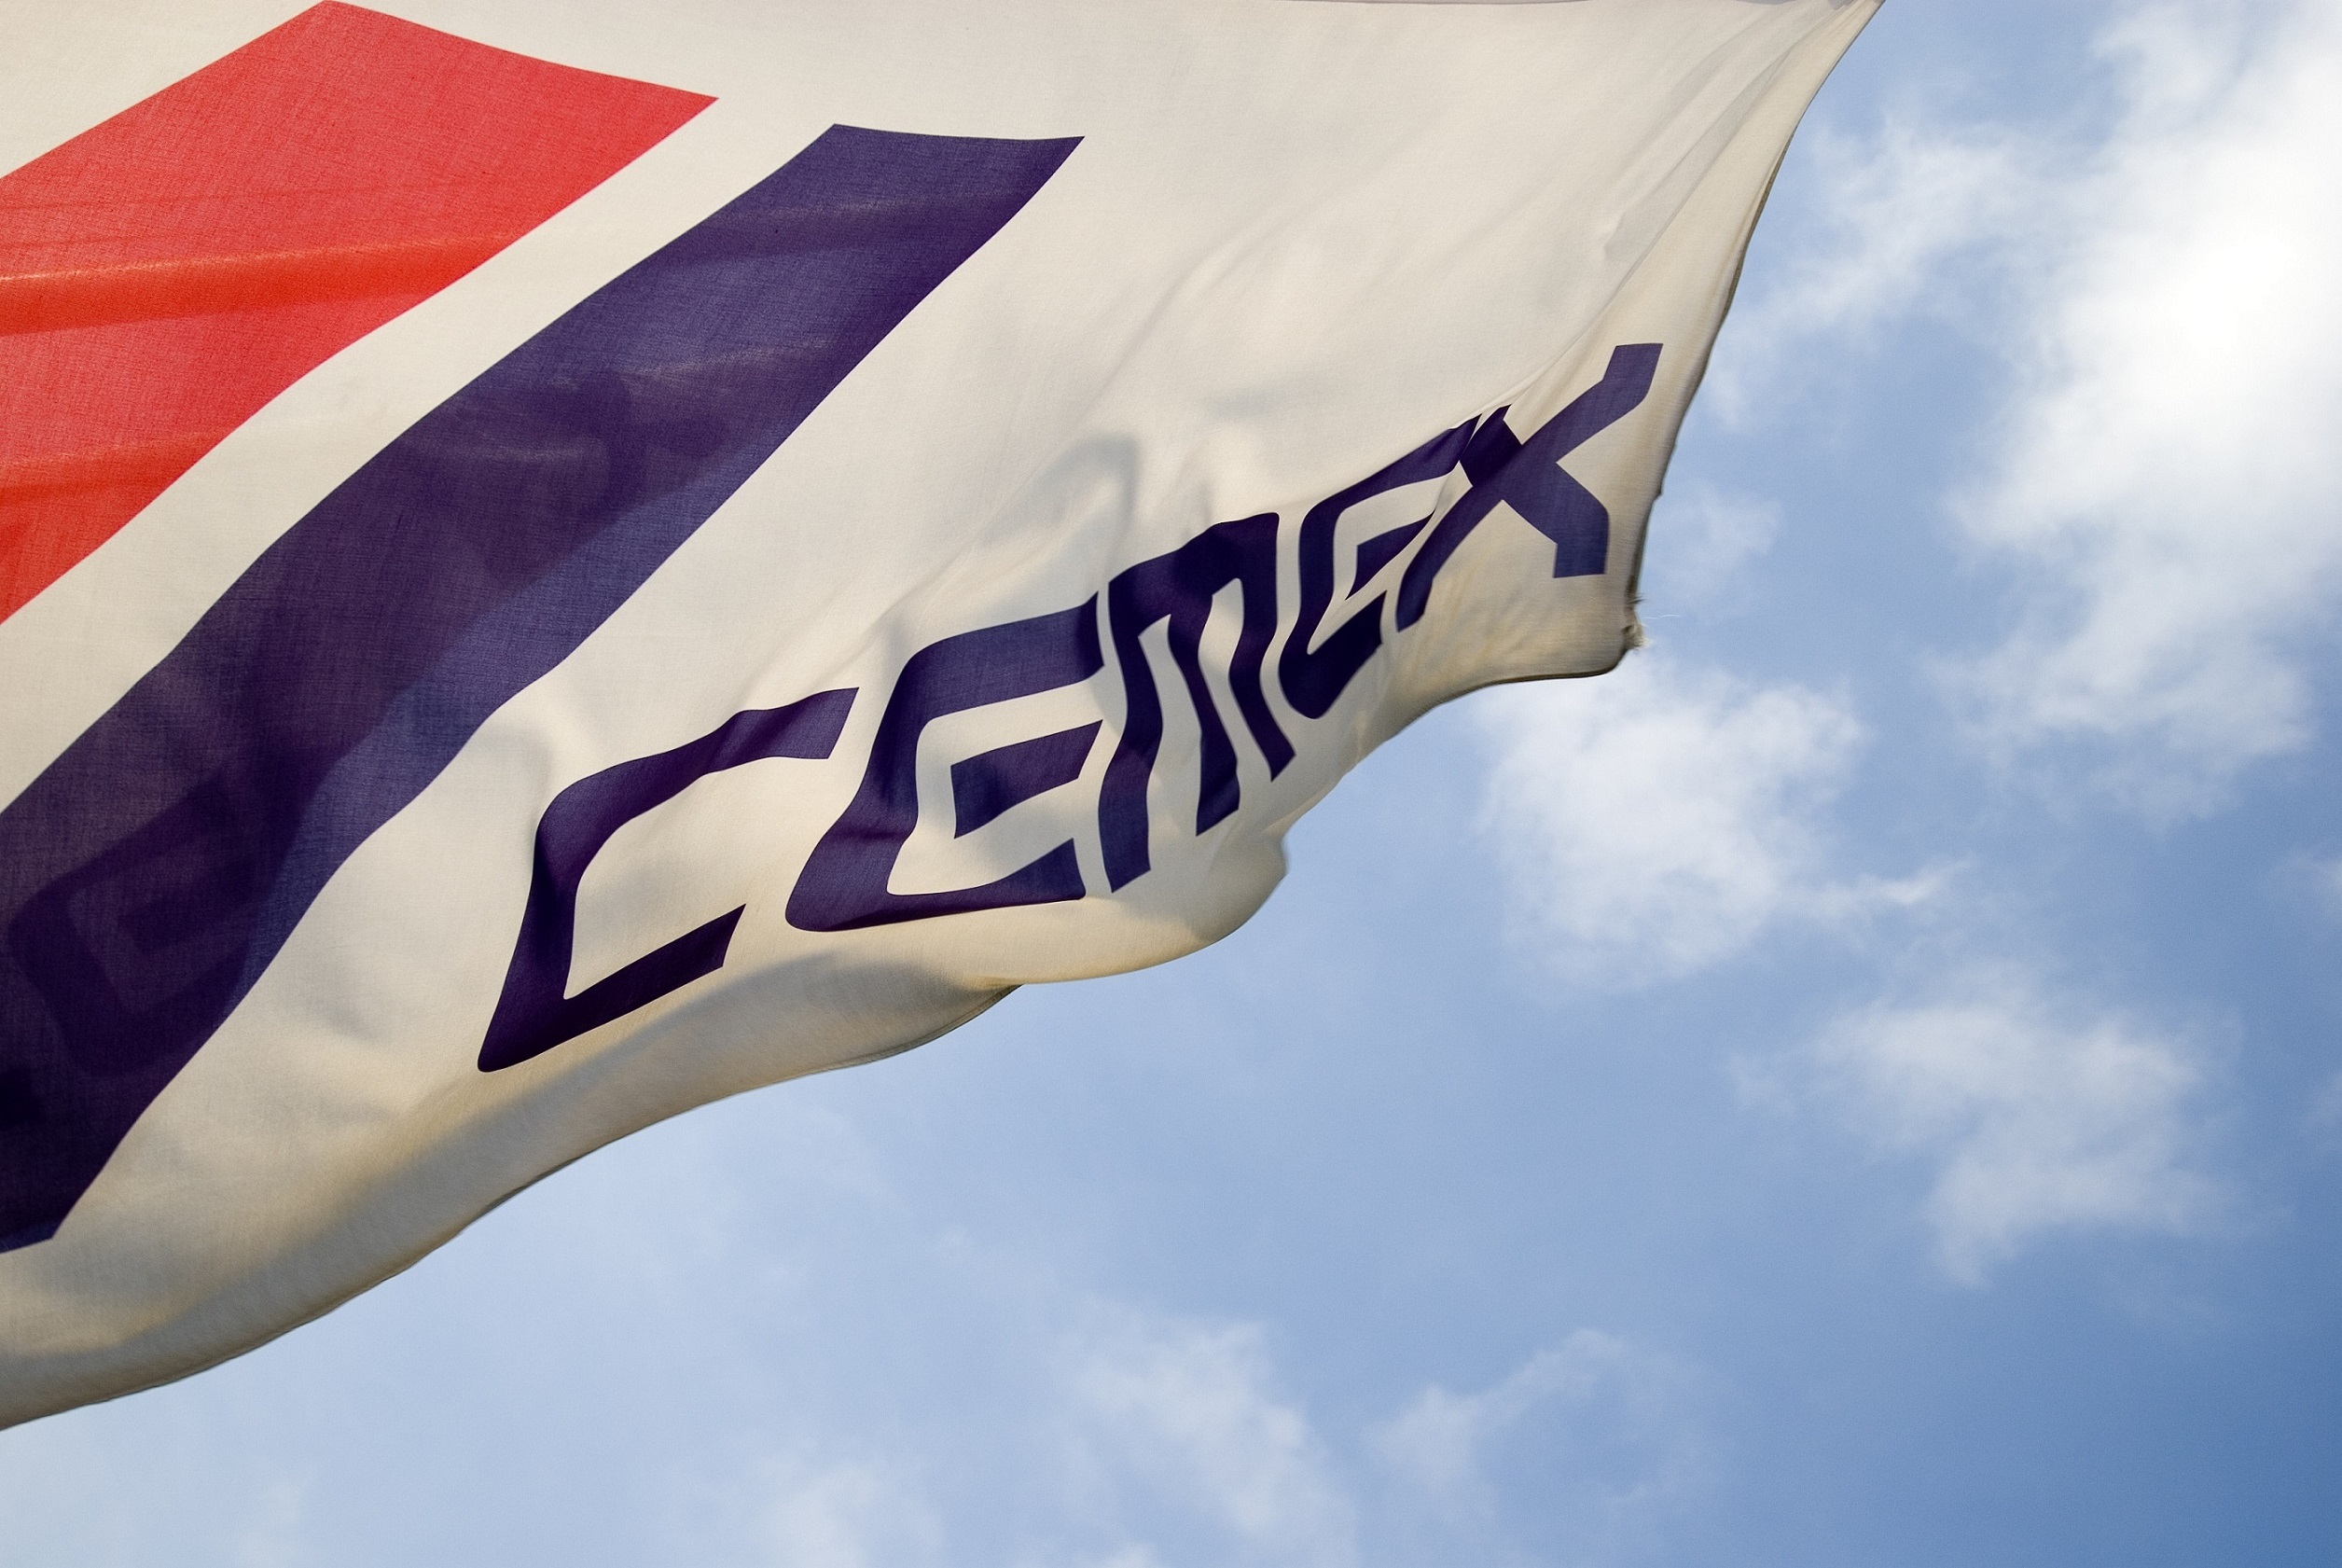 CEMEX supplied the Atlanta runway redevelopment from its cement plant in Clinchfield, Ga.